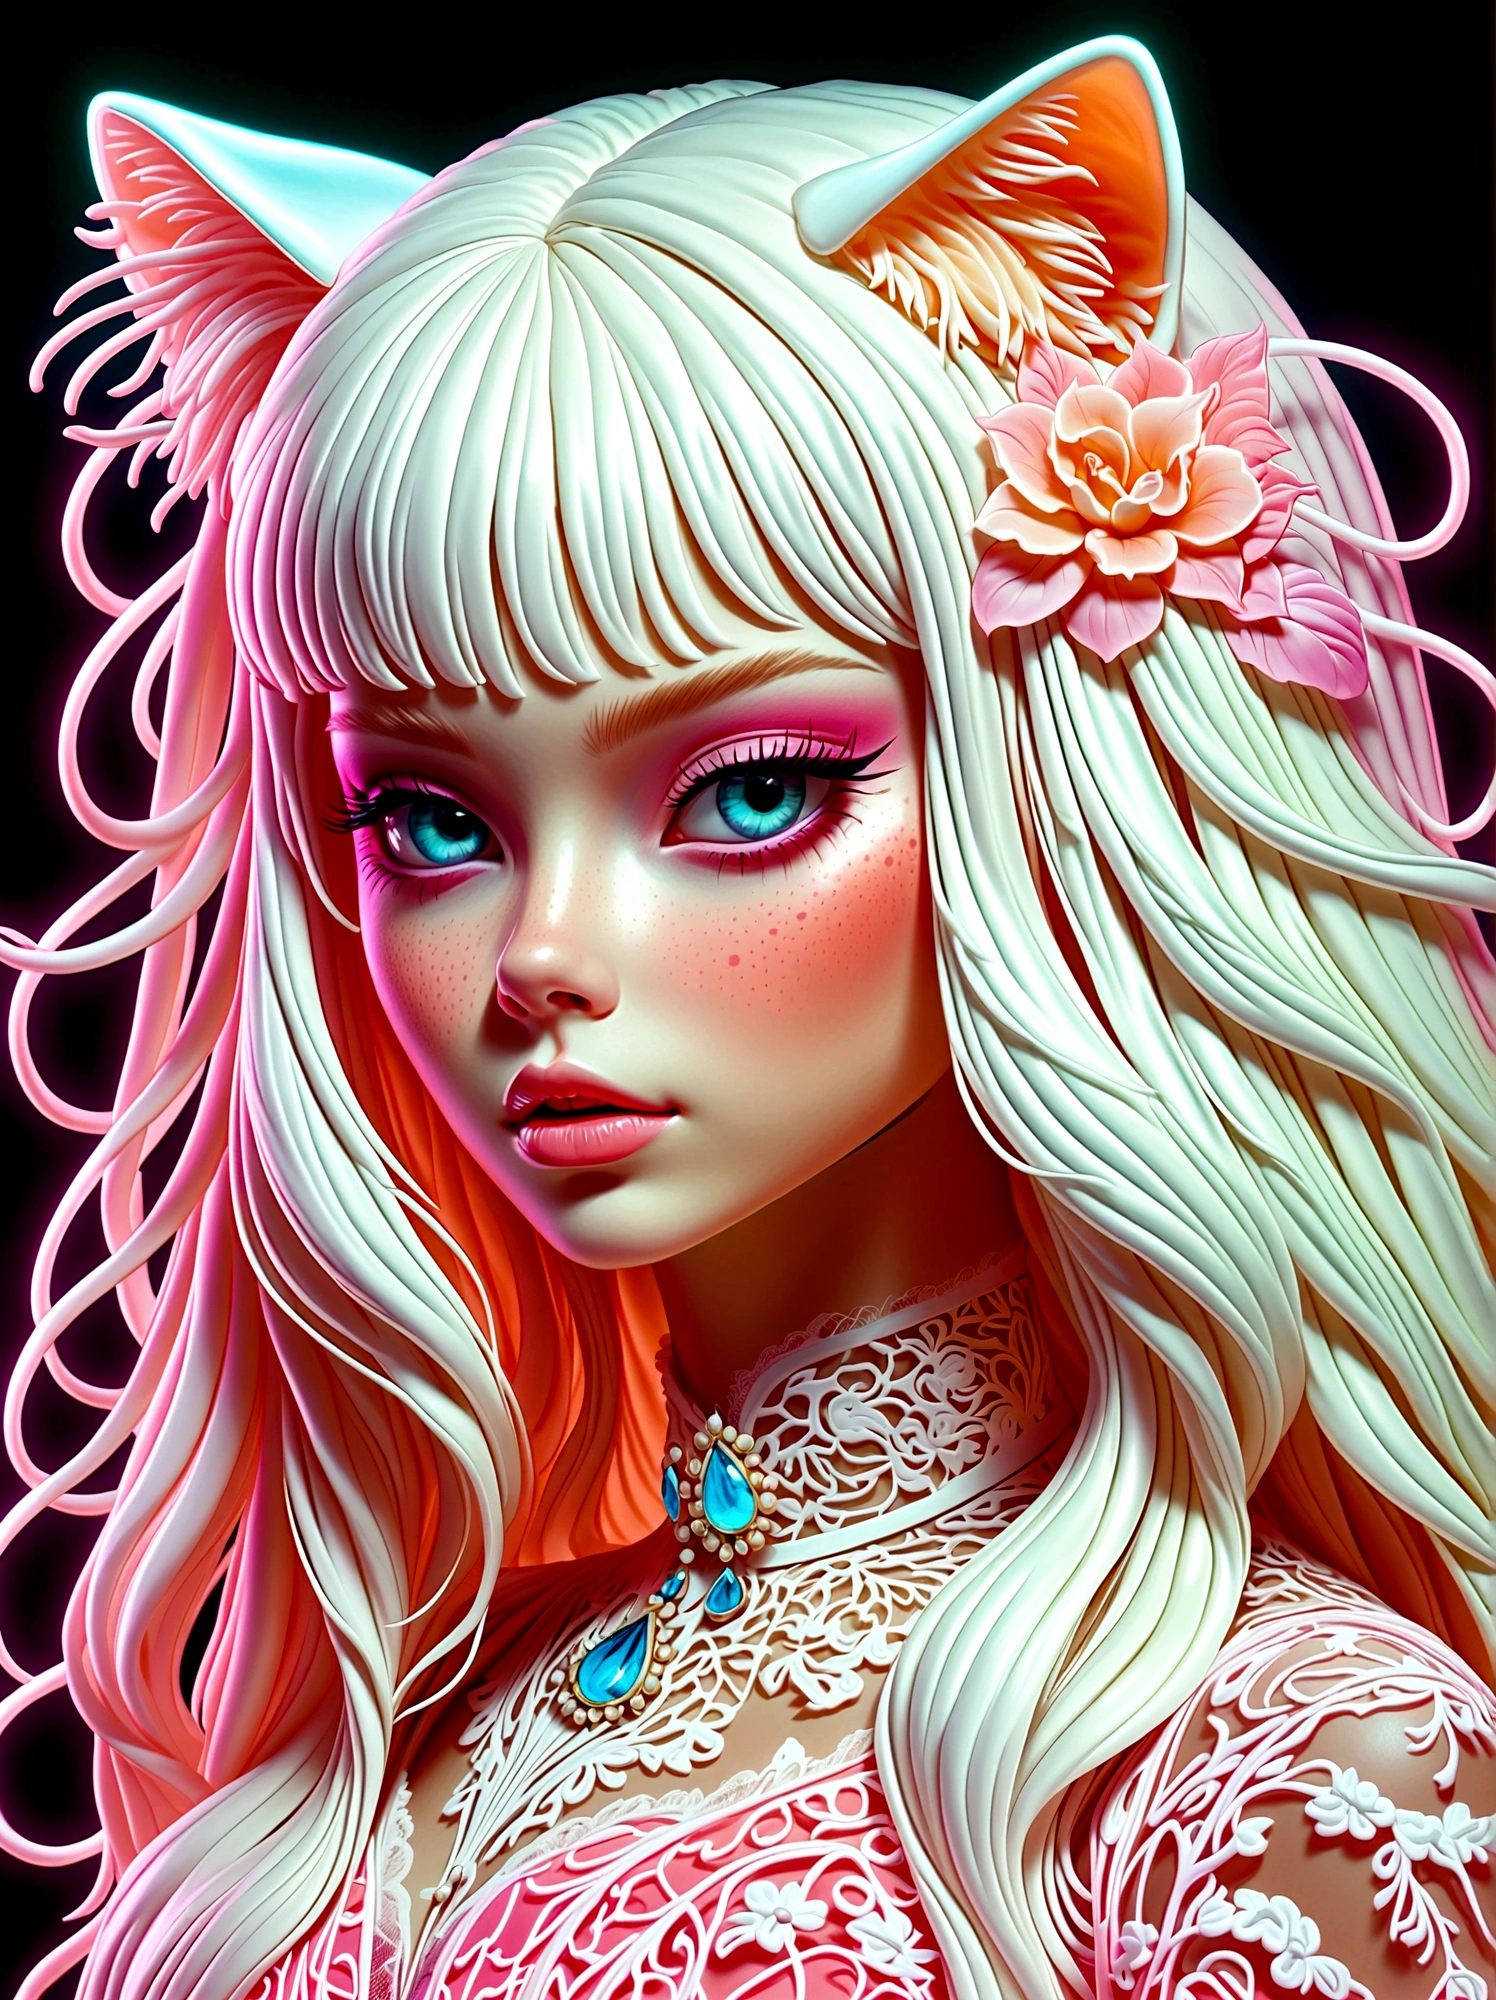 Neon, Made of glowing neon glass，Transparent Materials，Gloss，Refraction Details，Albino cat，Longbearded jellyfish on the head，Long hair doll，Plastic lace long skirt，Renaissance，Baroque，Psychedelic，romantic，neon palette, pale color, 1nhdg1